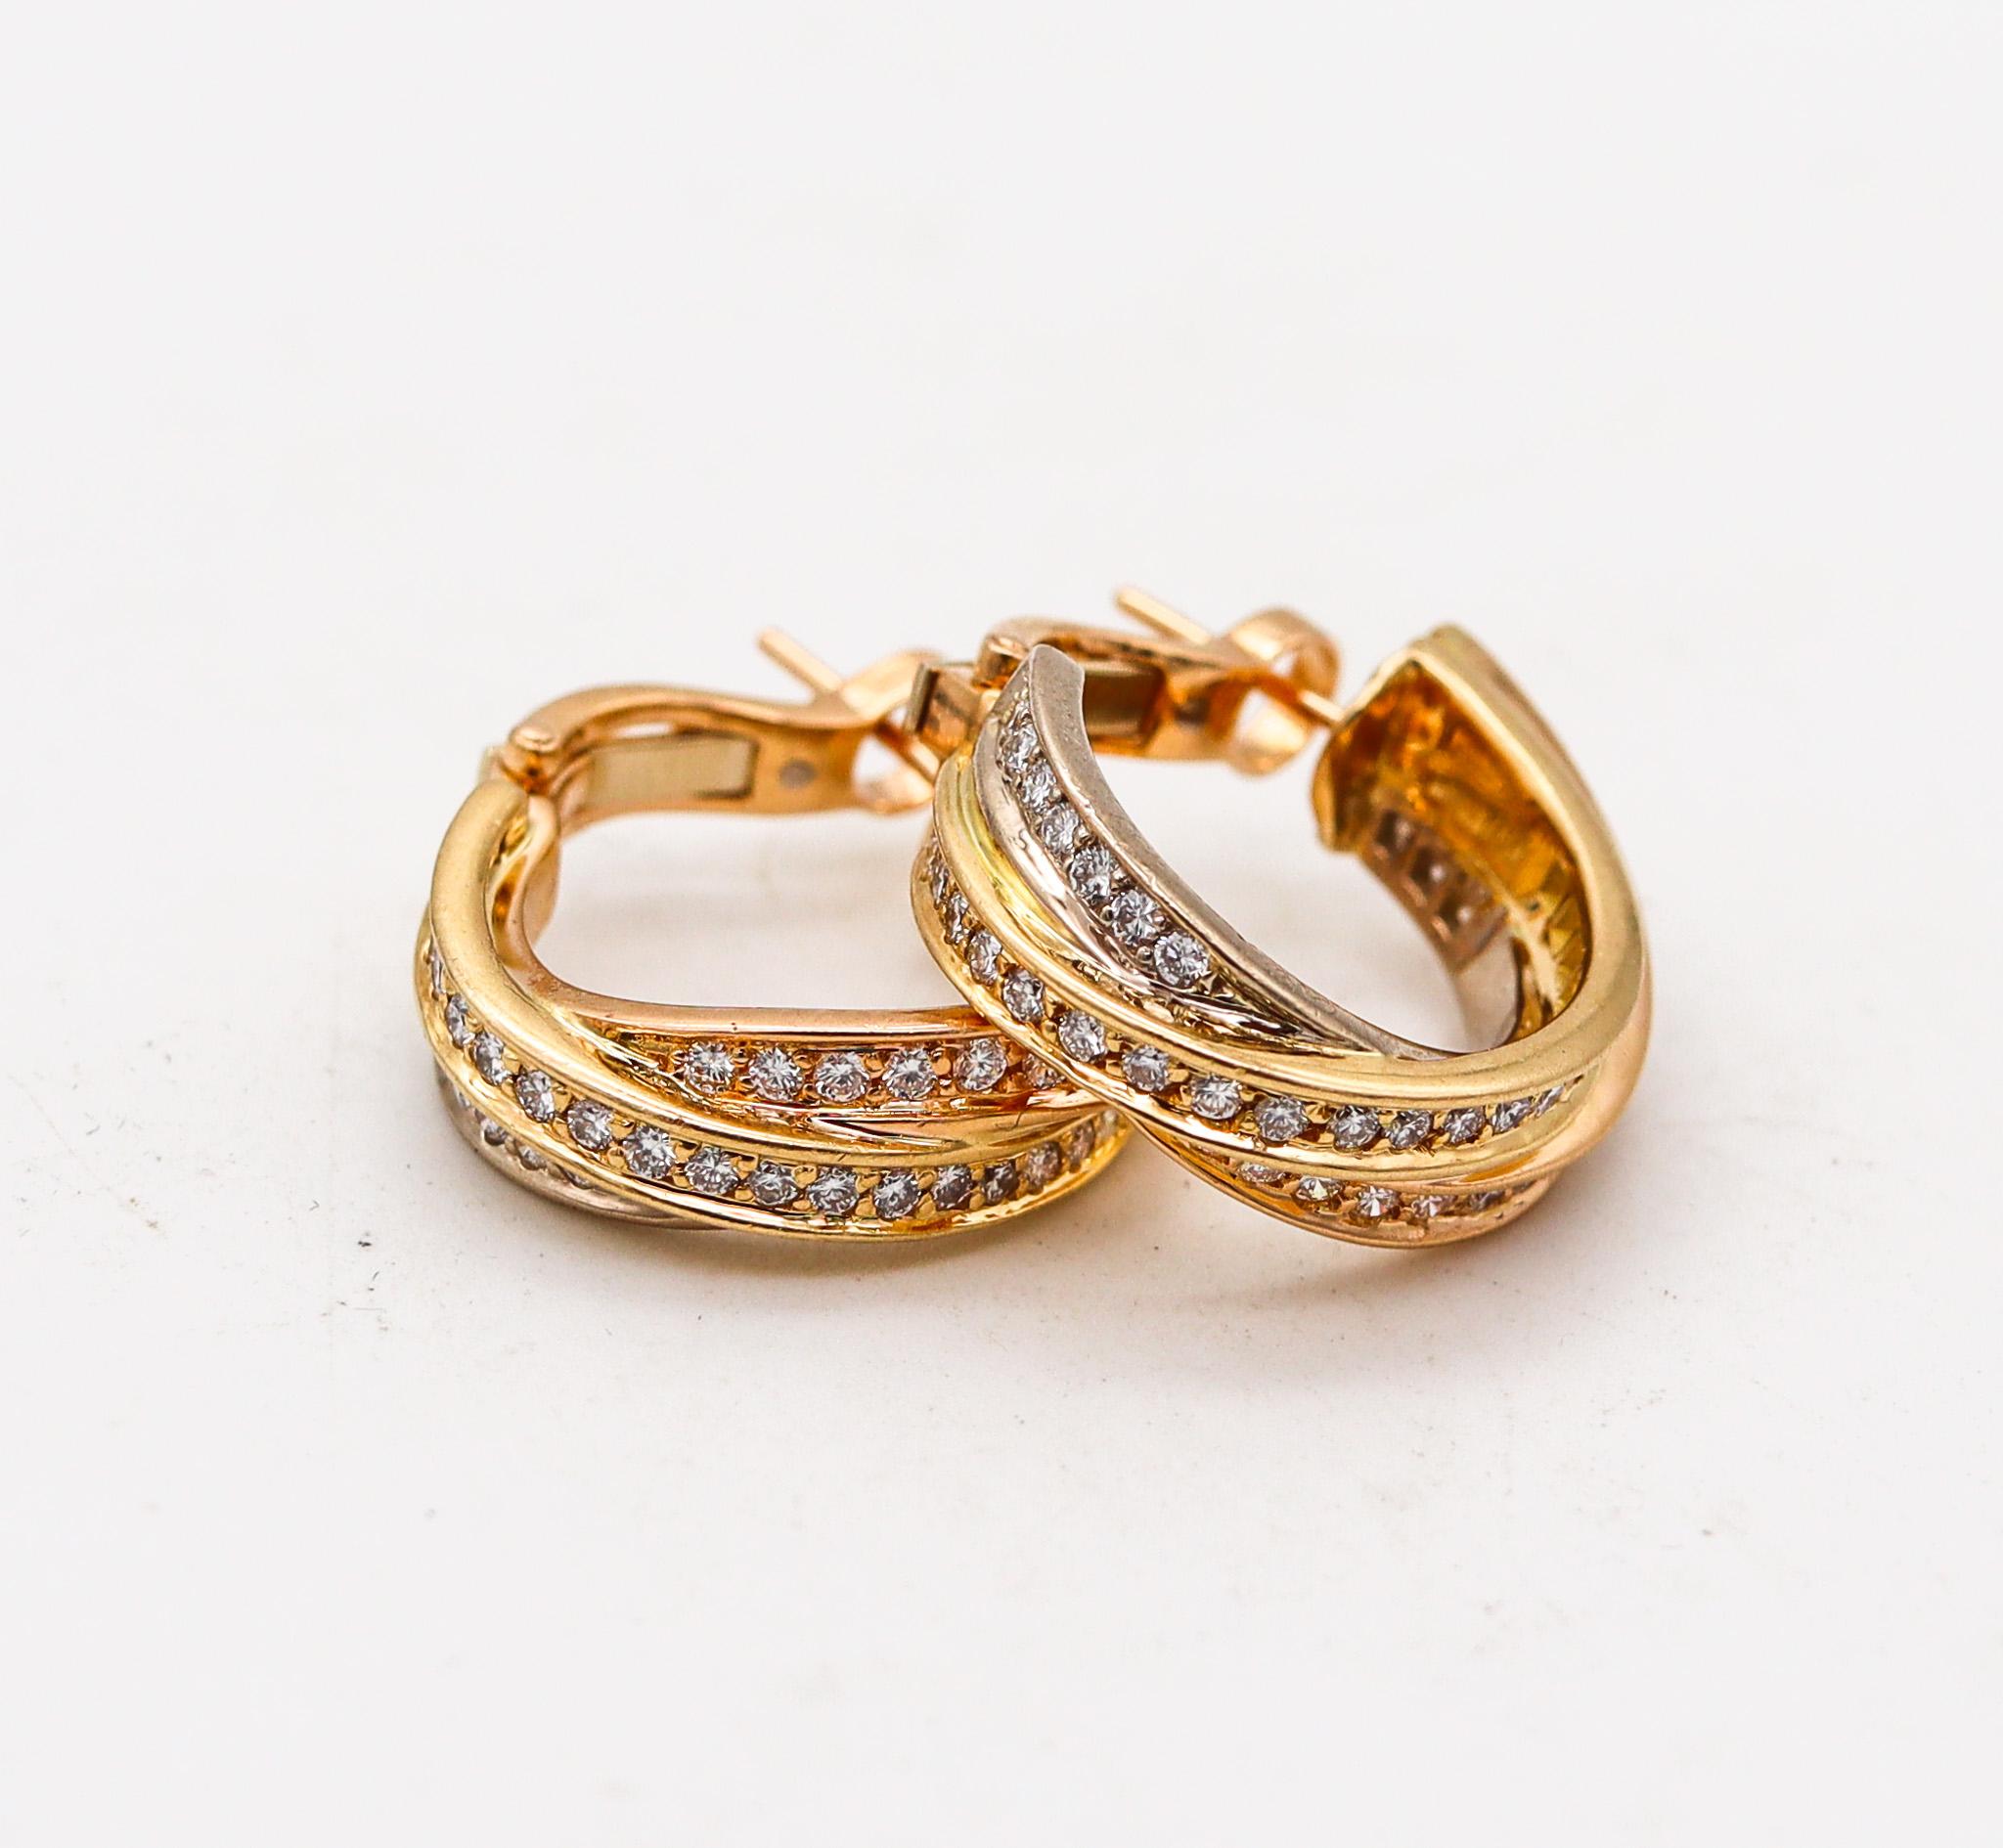 Modern Cartier Paris Trinity Earrings In 18Kt Yellow Gold With 2.07 Ctw In Diamonds